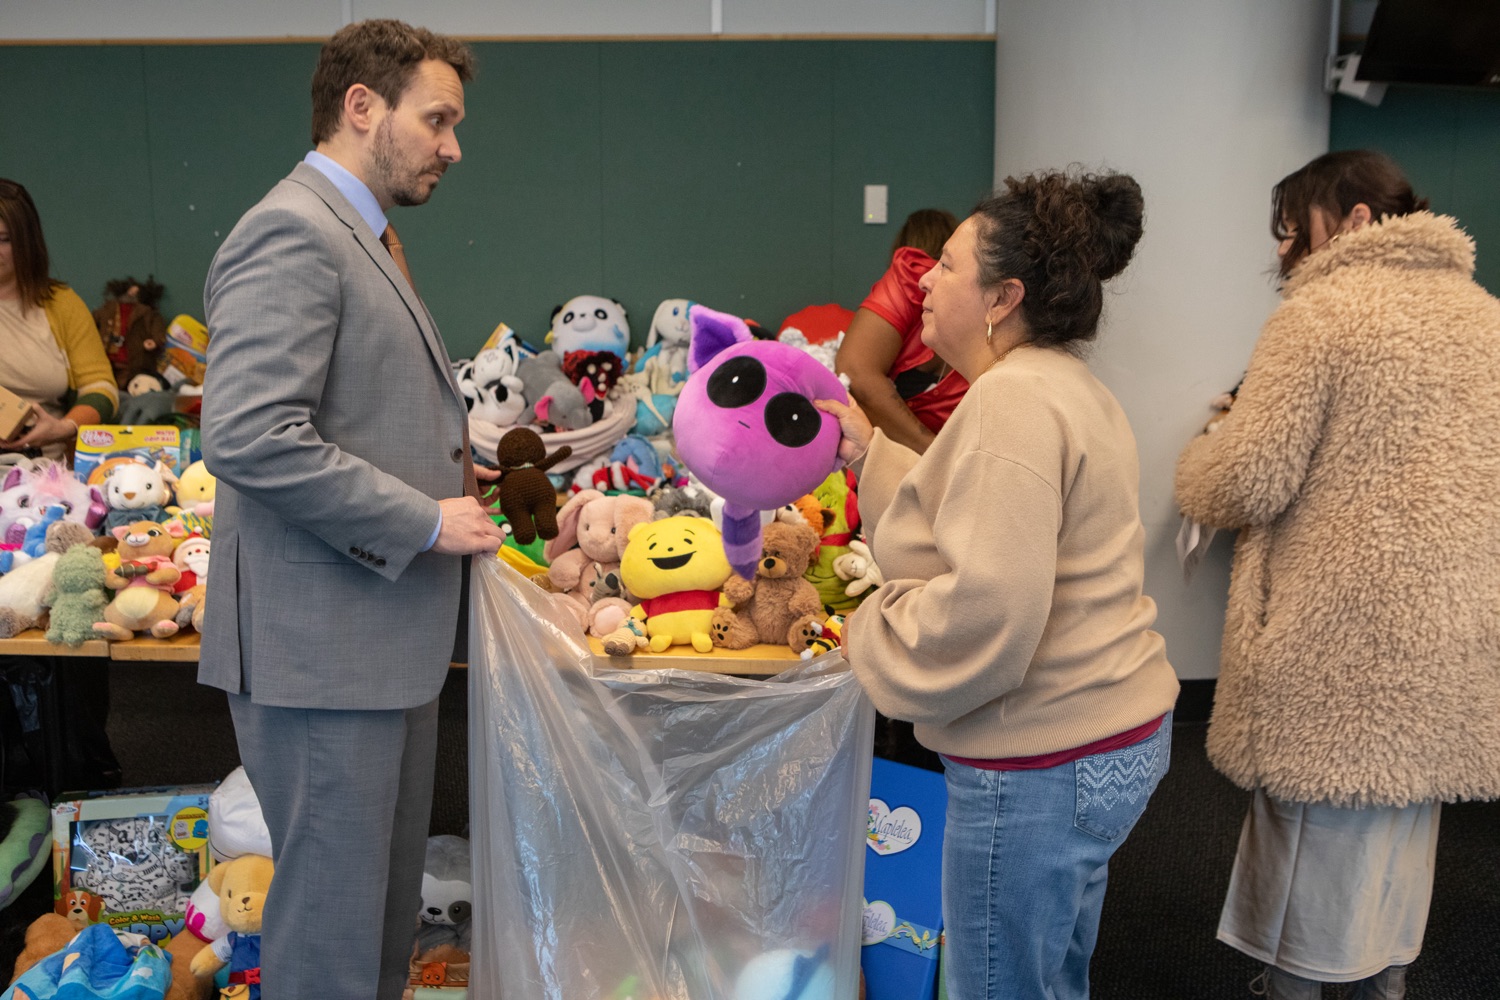 The Pennsylvania Departments of Labor & Industry (L&I) and Human Services (DHS) kicked off the 2023 holiday season Wednesday with an annual donation of stuffed toys collected throughout the year by L&I during routine safety inspections. The toys will be distributed to Pennsylvania families through DHS Holiday Wish program. . ."We inspect these stuffed toys throughout the year to ensure their safety for all children in Pennsylvania. Its become a tradition at L&I to donate the inspected toys to the Holiday Wish program because we get to brighten the holidays for a few children while reminding parents and retailers of the importance of toy safety, L&I Secretary Nancy A. Walker. I encourage any Pennsylvanian who can give a little extra this year to consider donating to a holiday charity. The joy and happiness through a simple act of kindness can lead to lifelong memories for countless Pennsylvania children.<br><a href="https://filesource.amperwave.net/commonwealthofpa/photo/24018_LI_StuffedToys_ERD_023.jpg" target="_blank">⇣ Download Photo</a>